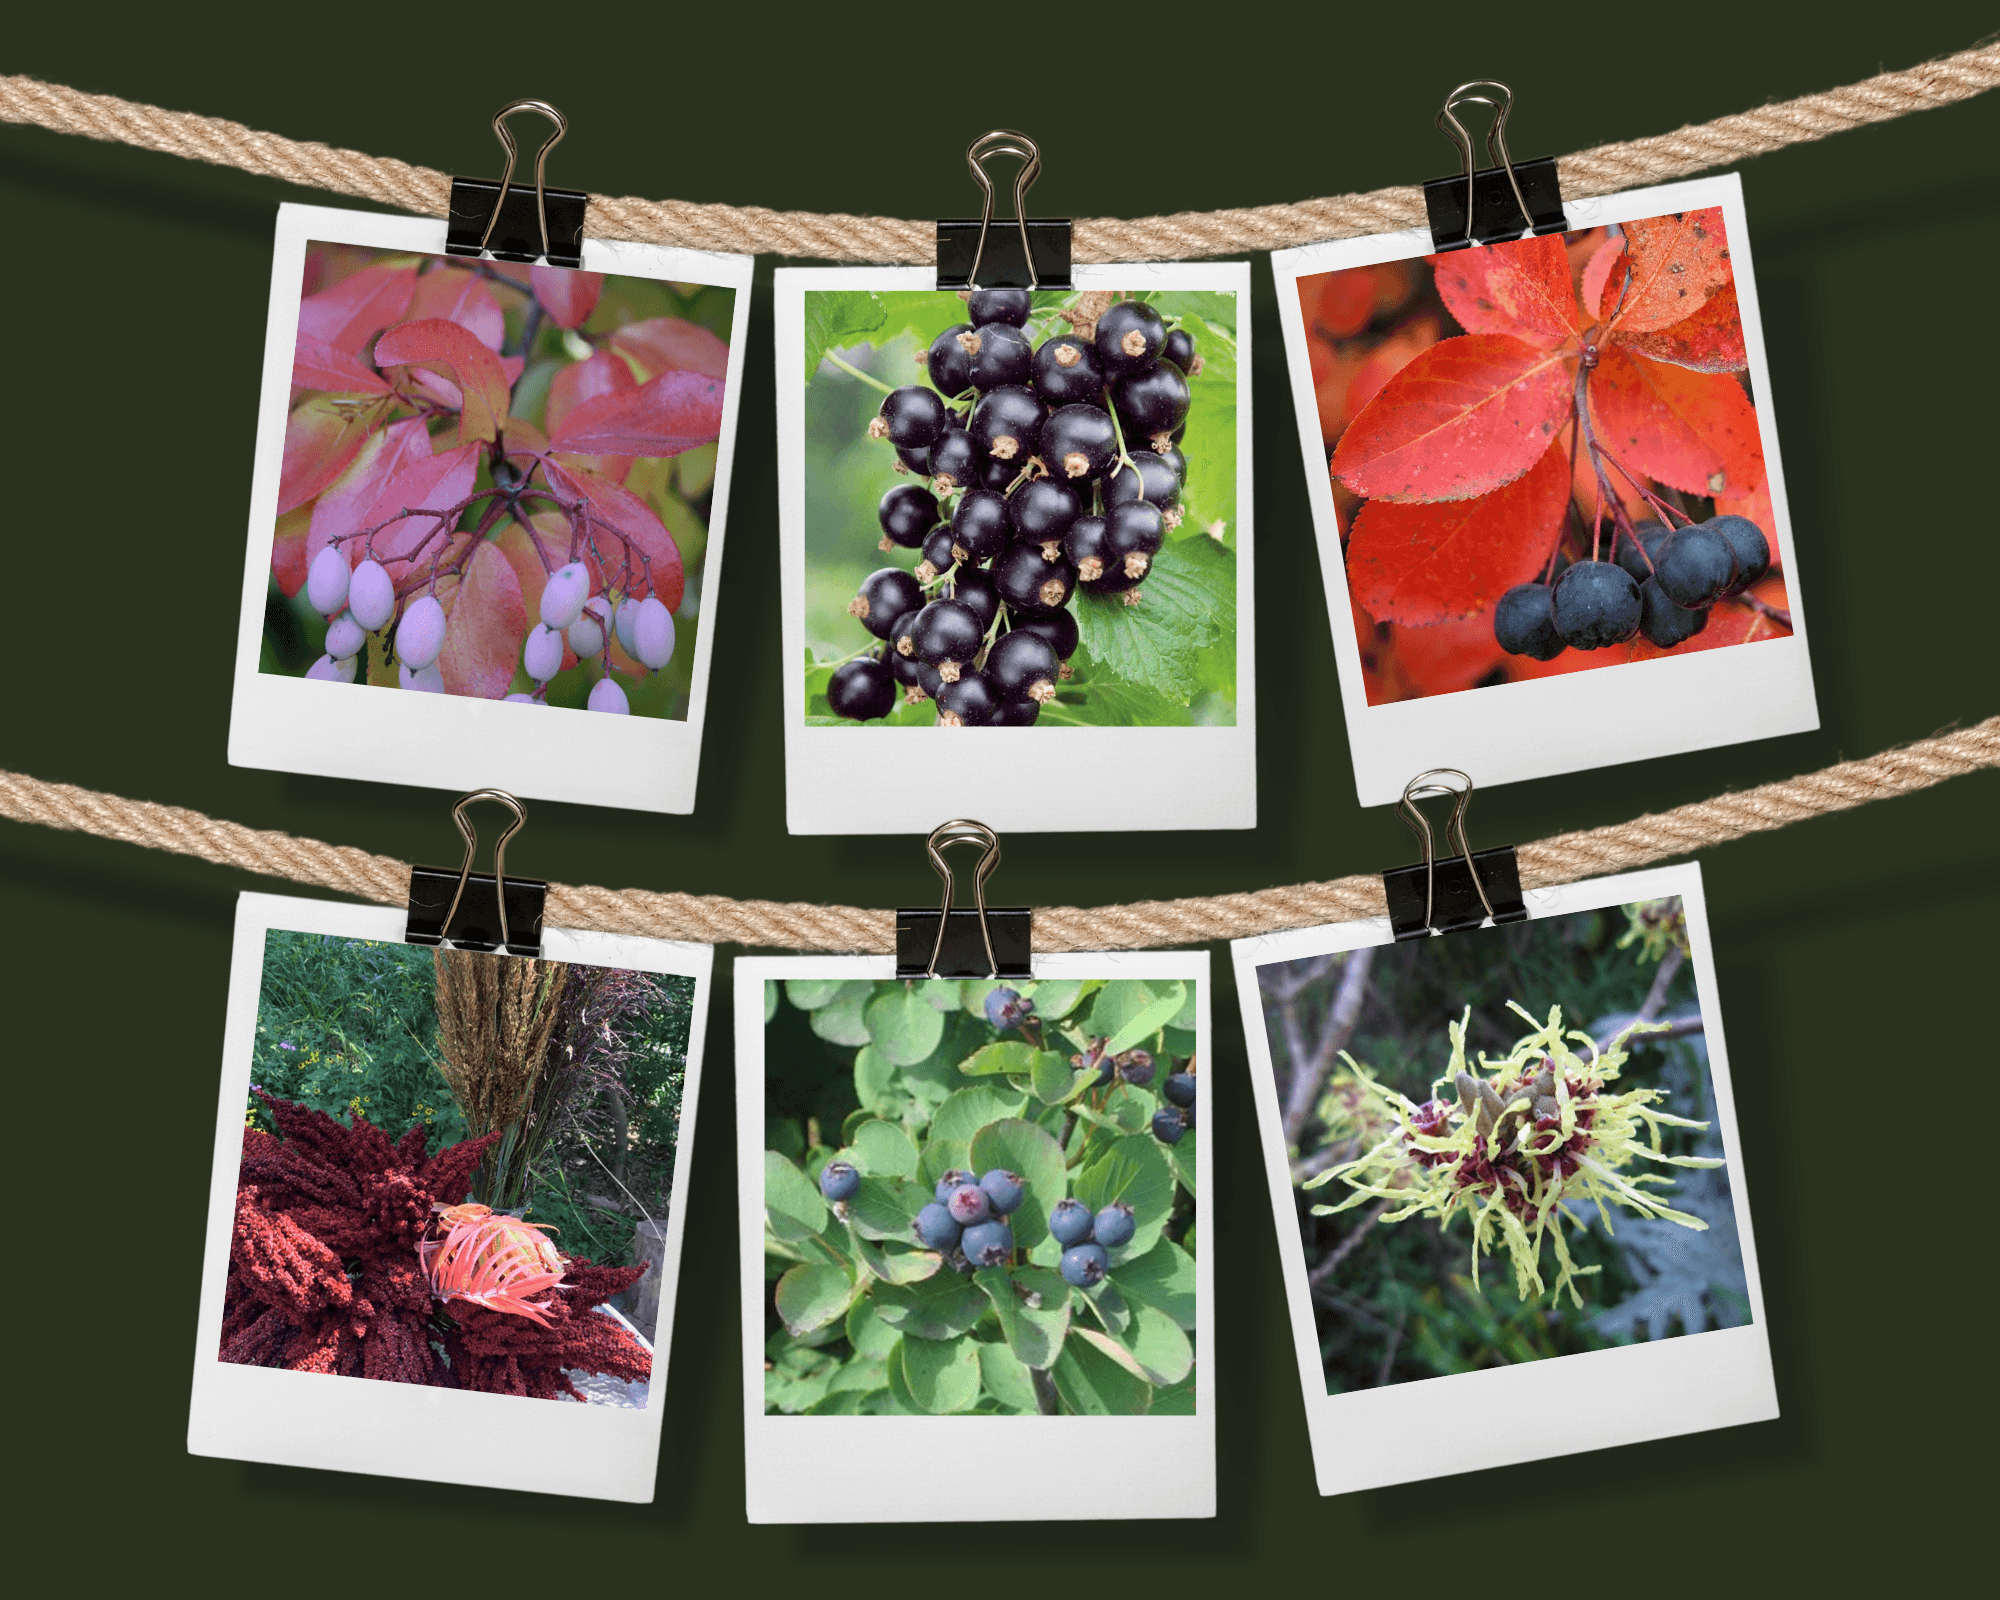 This image depicts the fruits and flowers of six native Nebraska shrubs that benefit wildlife. 